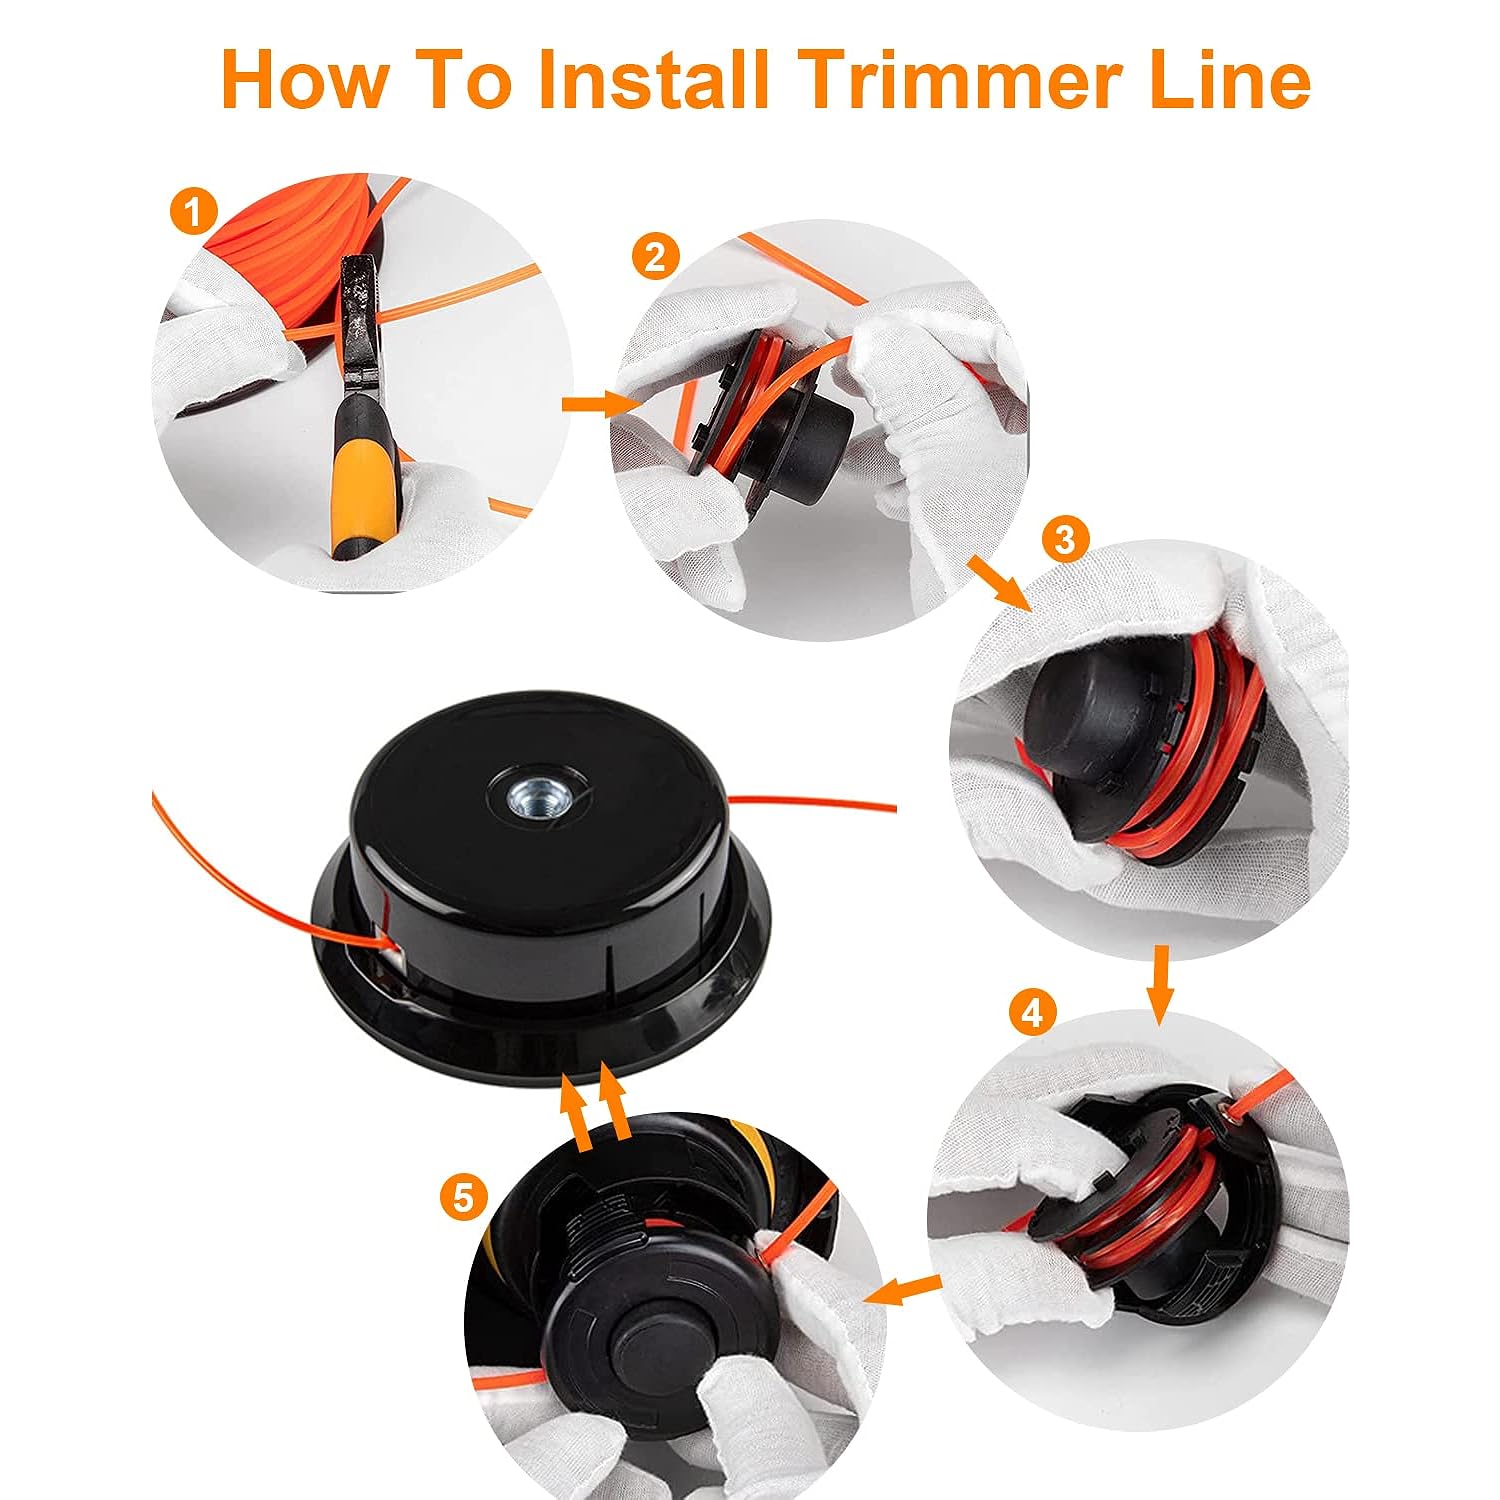 TKM Home 3 Pound Trimmer Line .105, String Trimmer Line Donut, Weed Eater String With Line Cutter, Orange Square